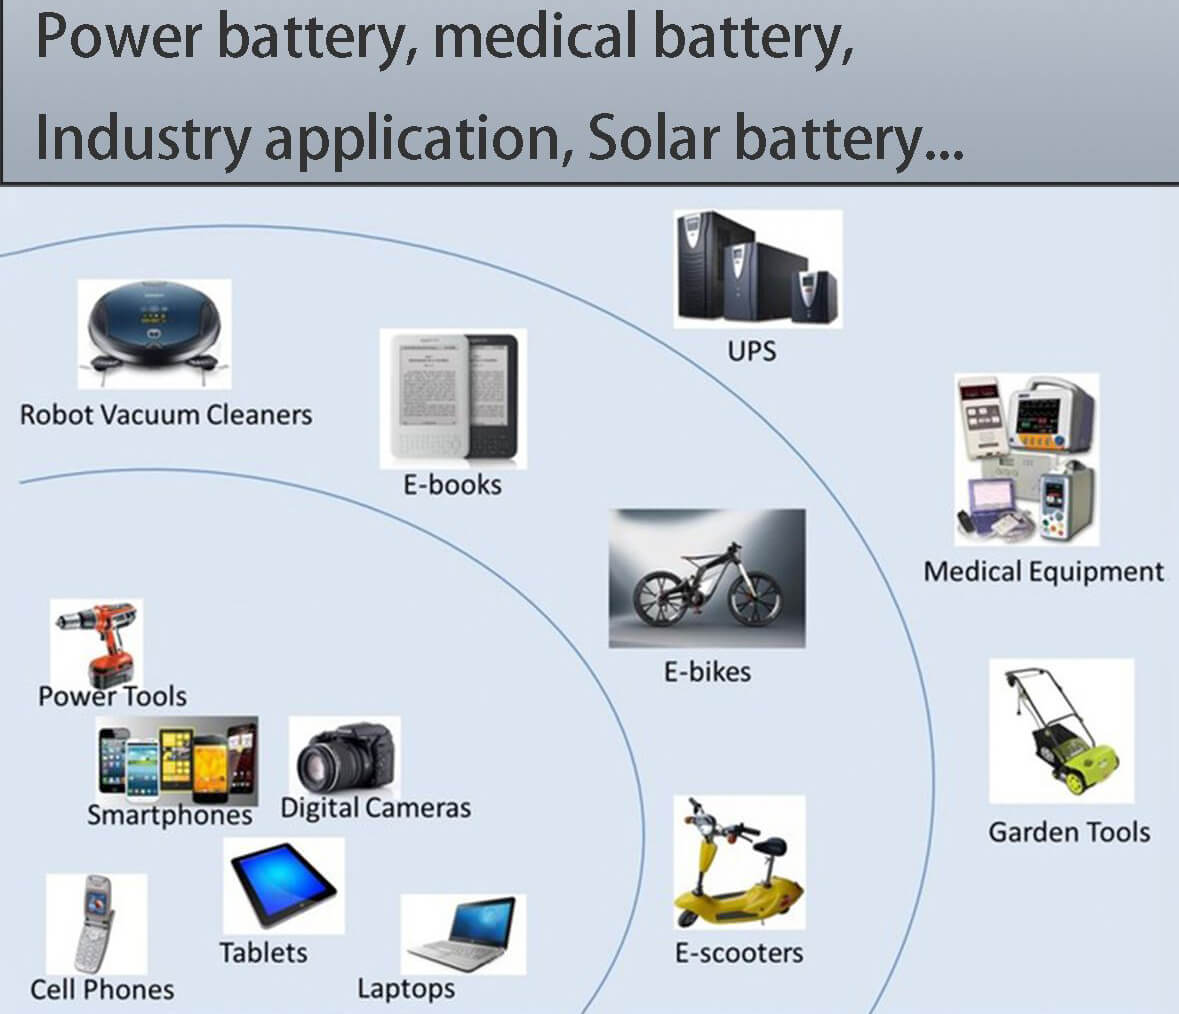 Different lithium ion battery applications